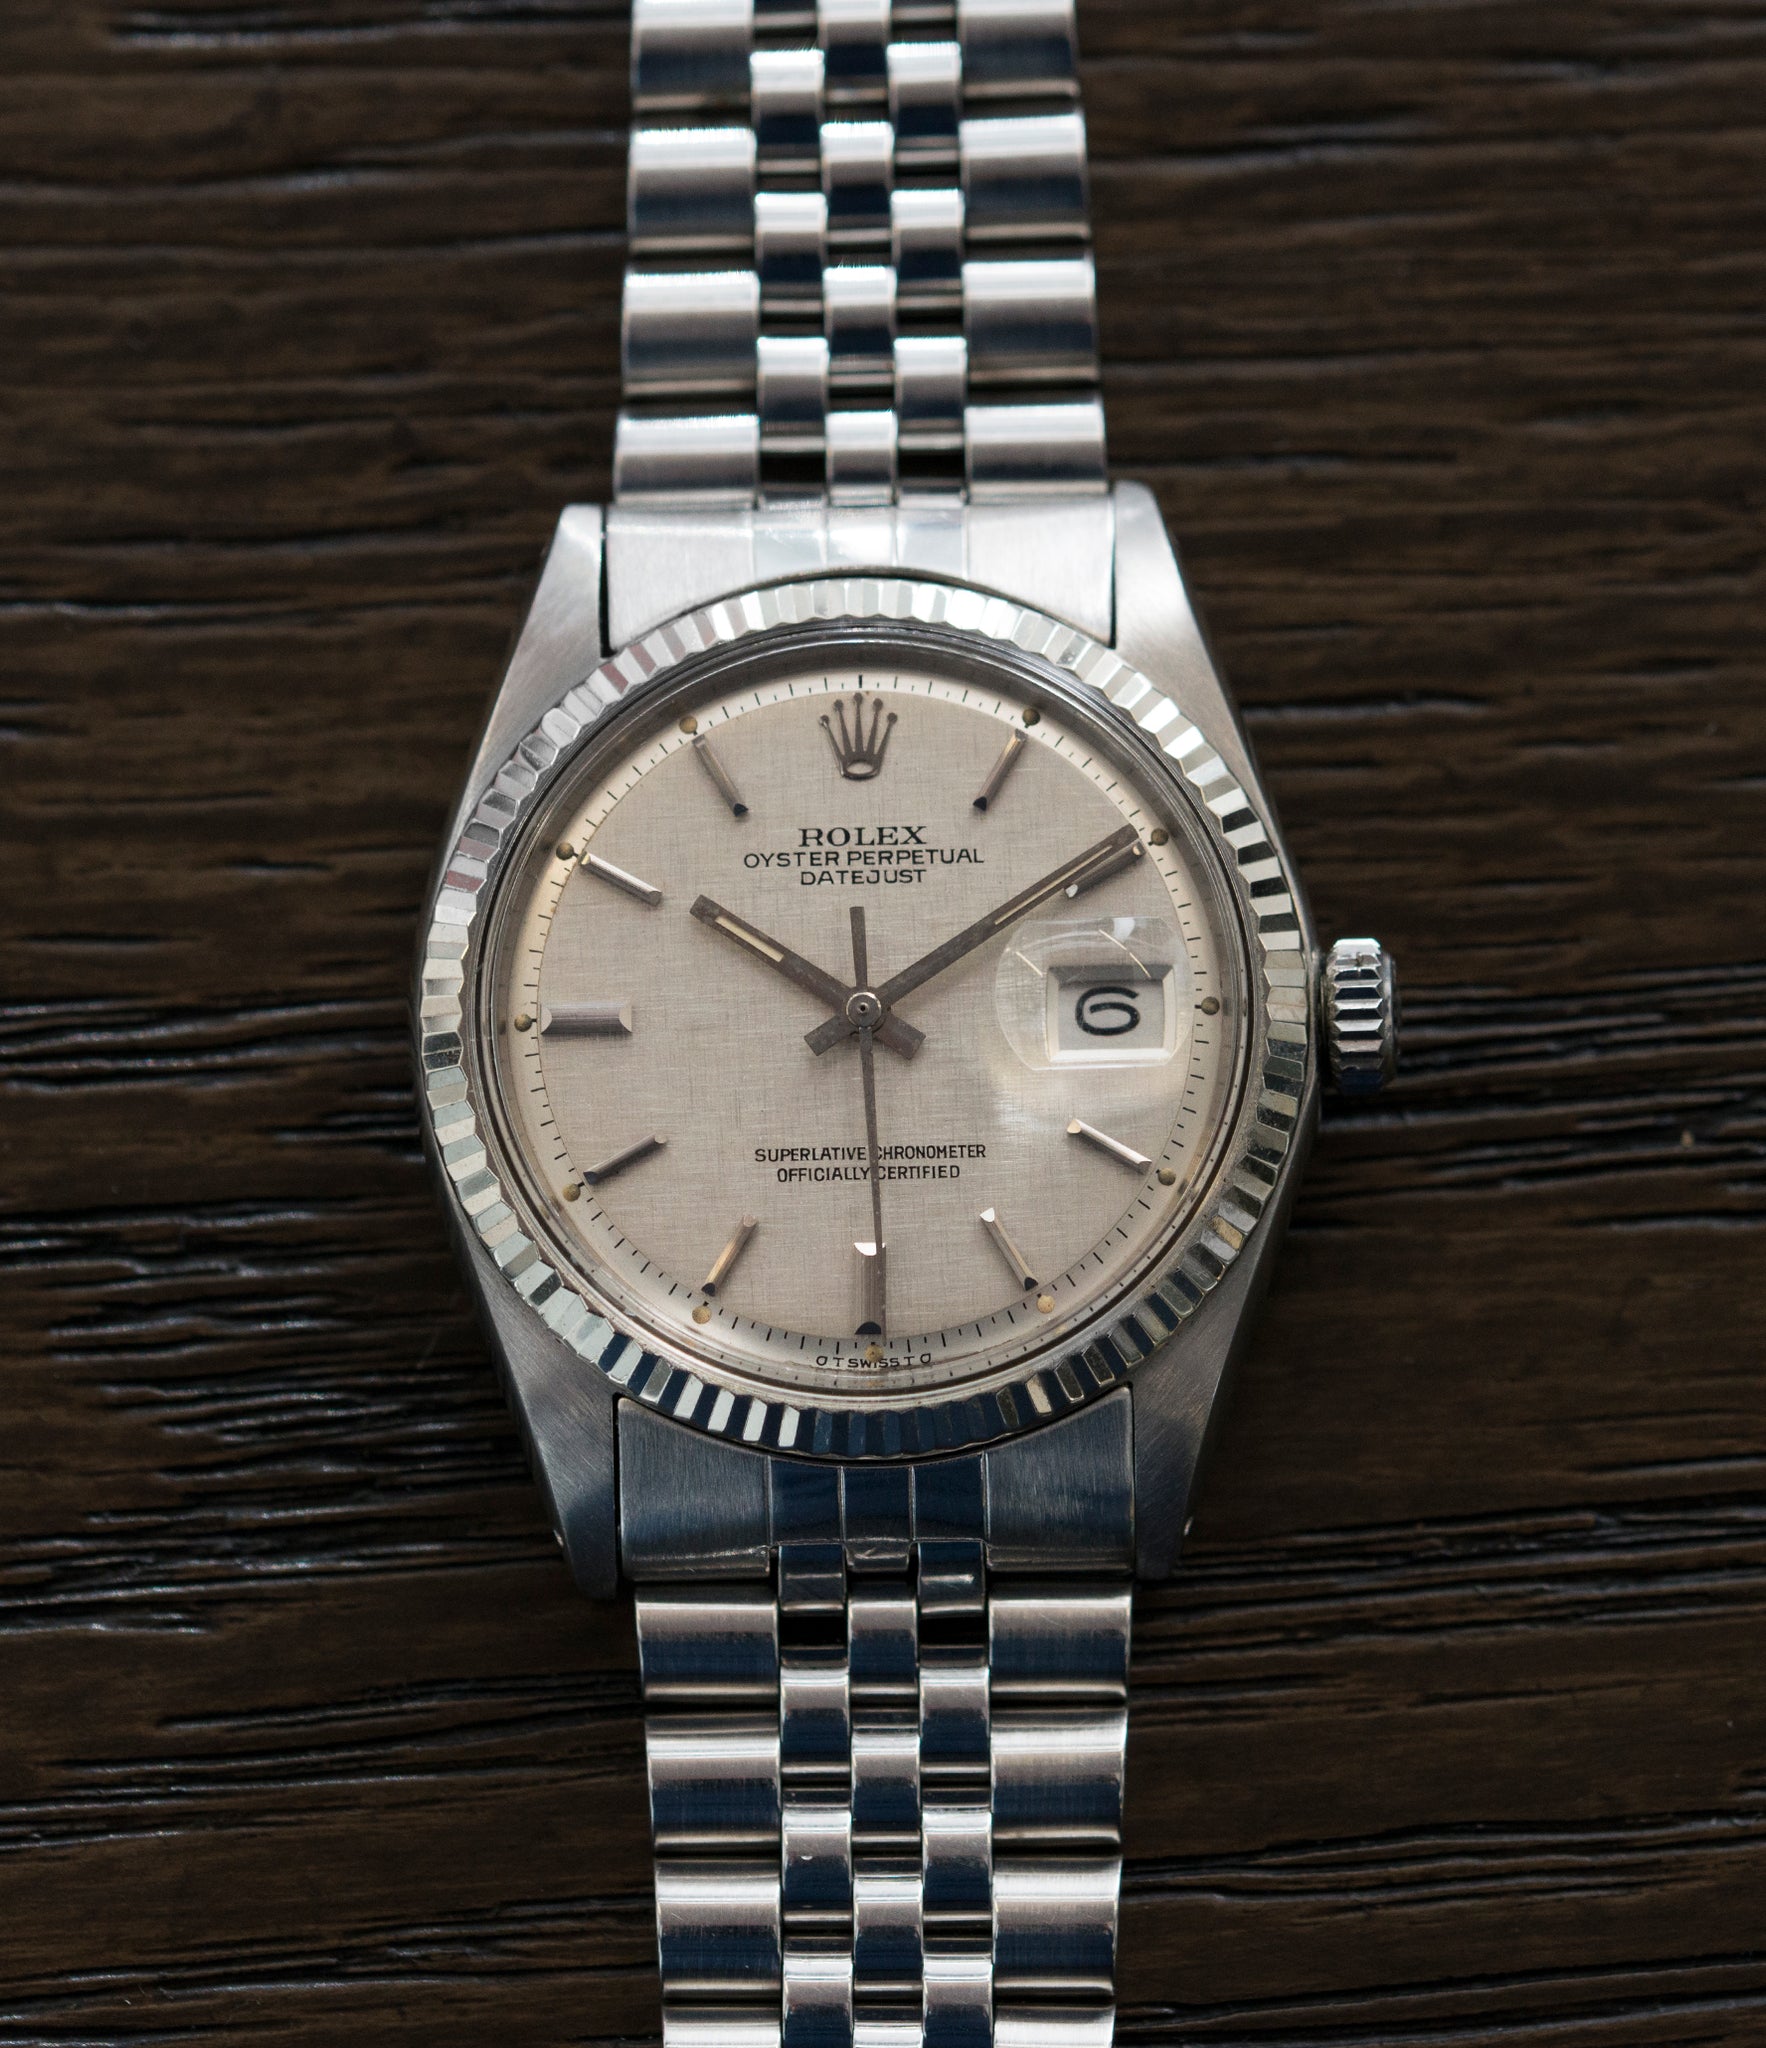 selling Rolex Datejust 1601 linen dial Oyster Perpetual vintage automatic steel sport dress watch for sale online at A Collected Man London UK specialist rare vintage watches